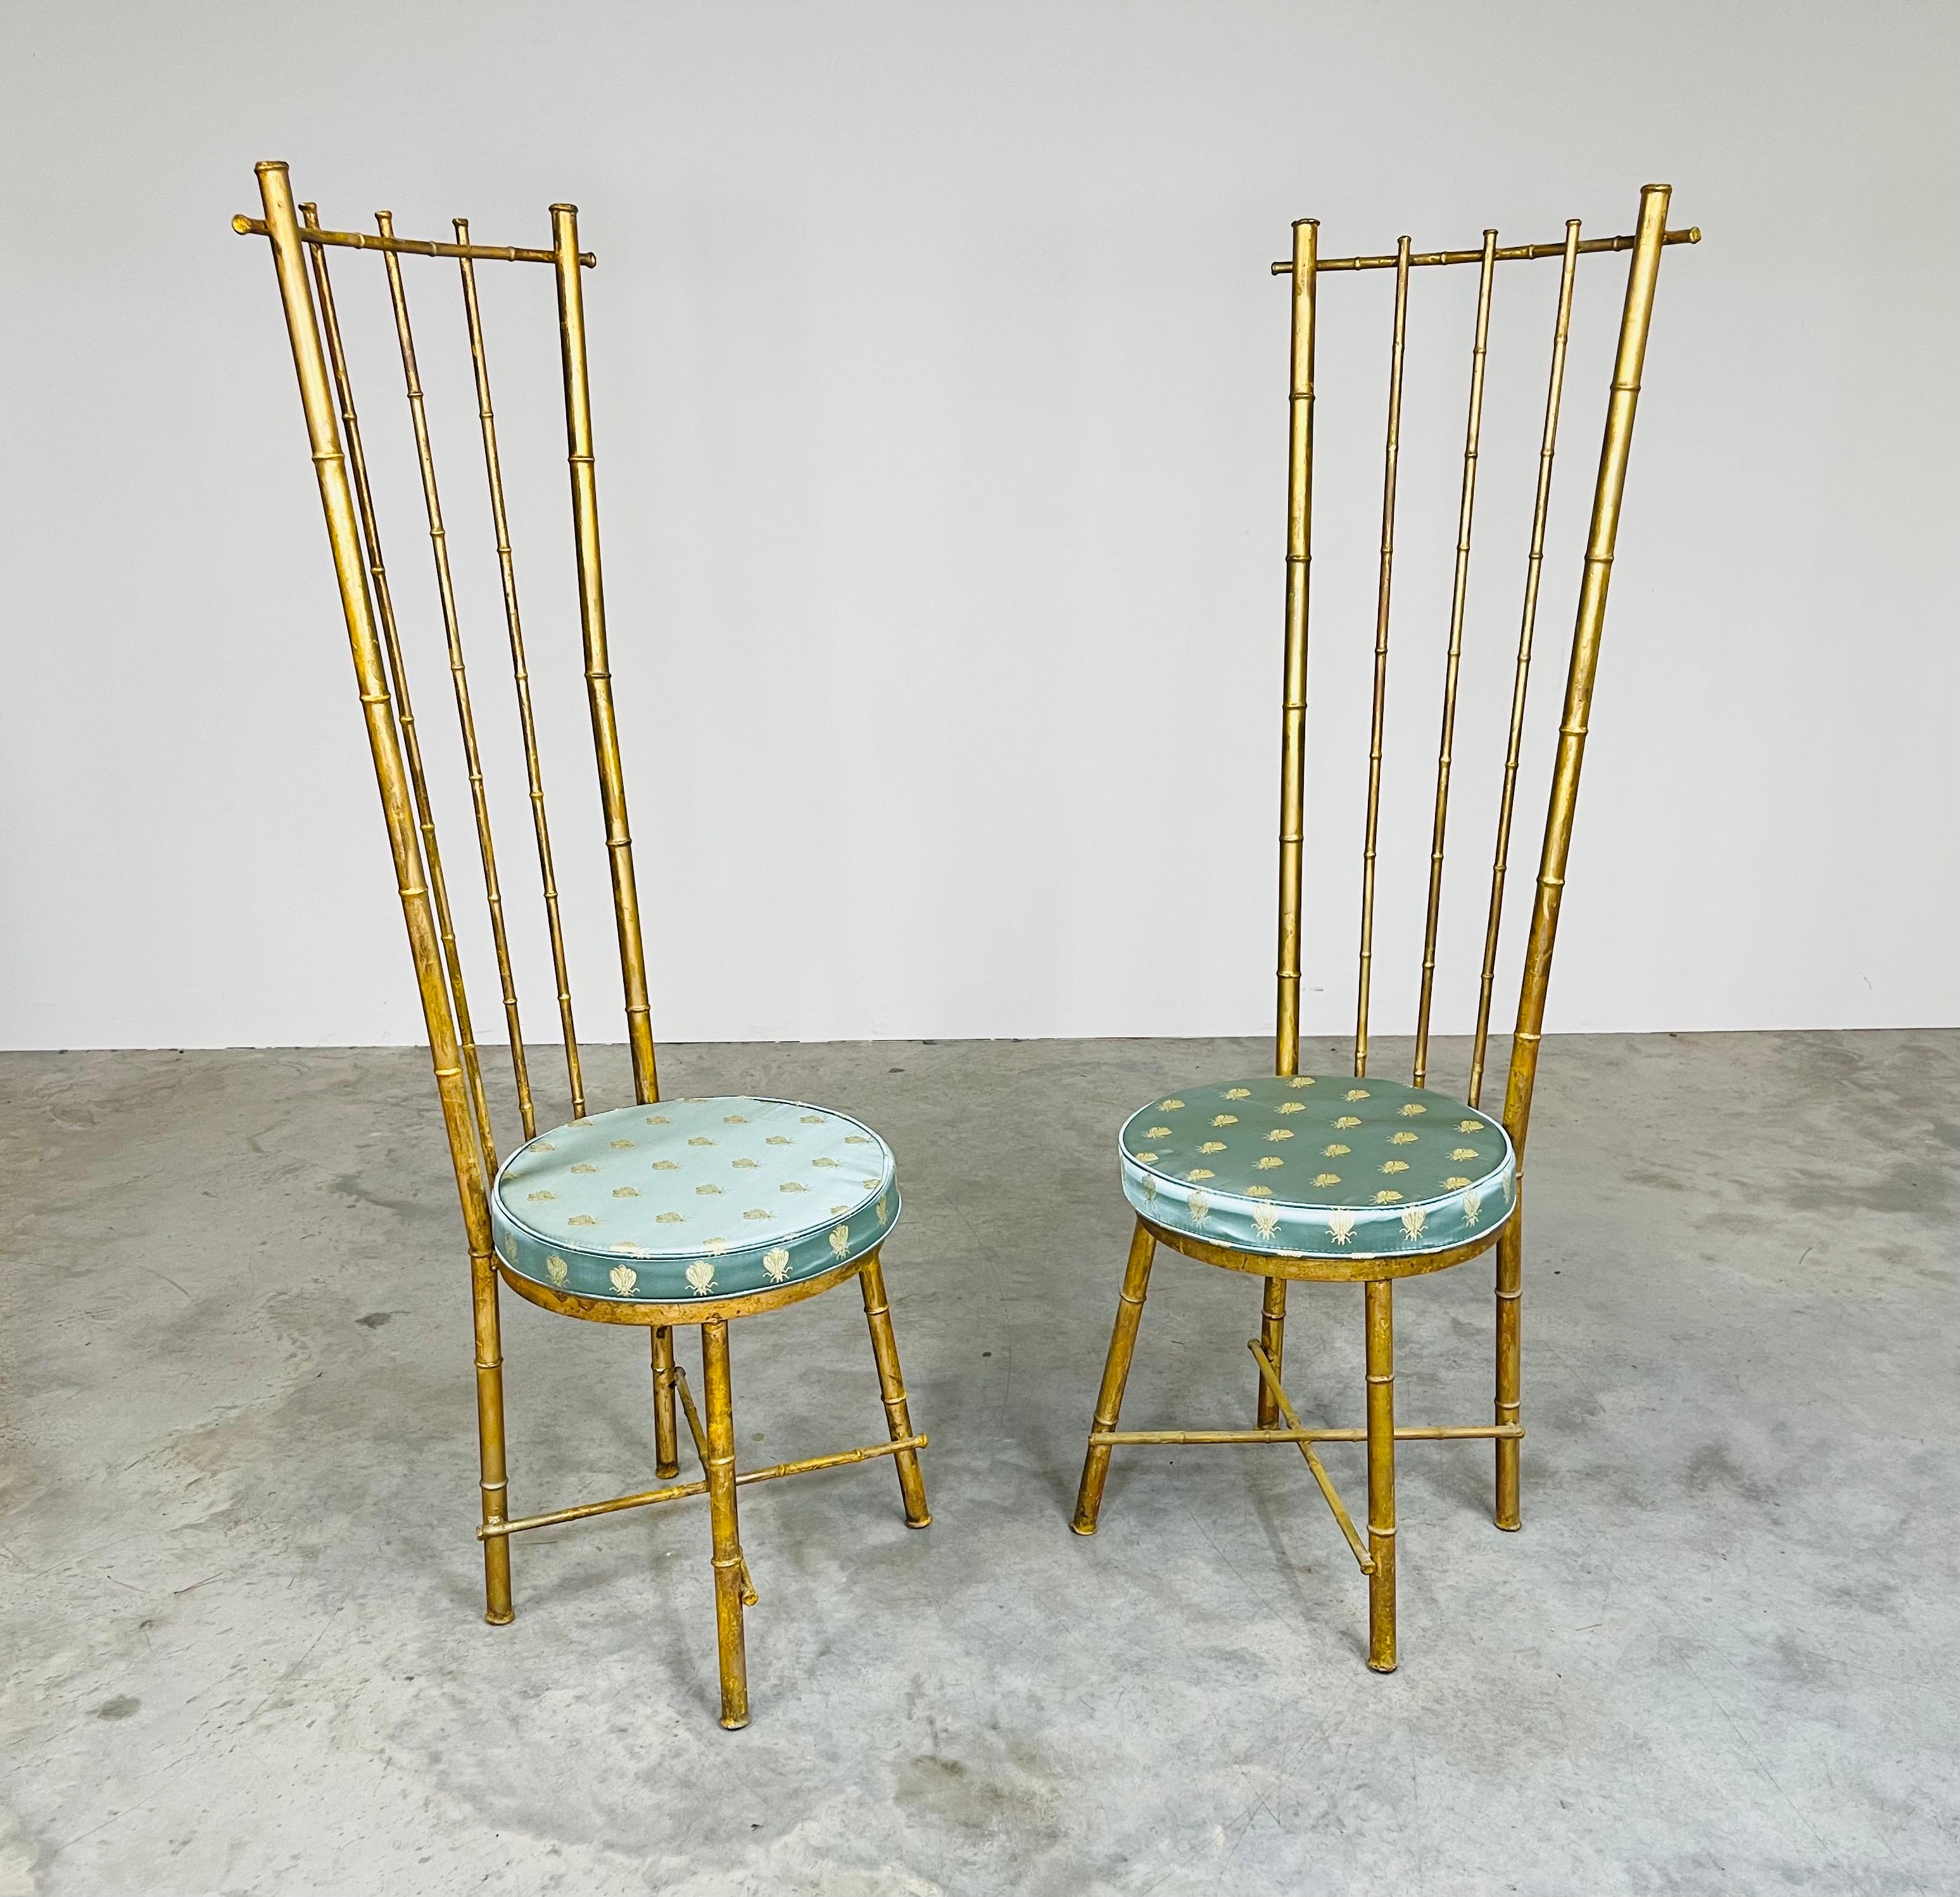 An elegant pair of Hollywood Regency gold gilt metal faux bamboo high-back accent chairs having silk bumblebee seat cushions. Very unique and playful in design. These attract attention in any setting and are quite comfortable as well. 
In very good